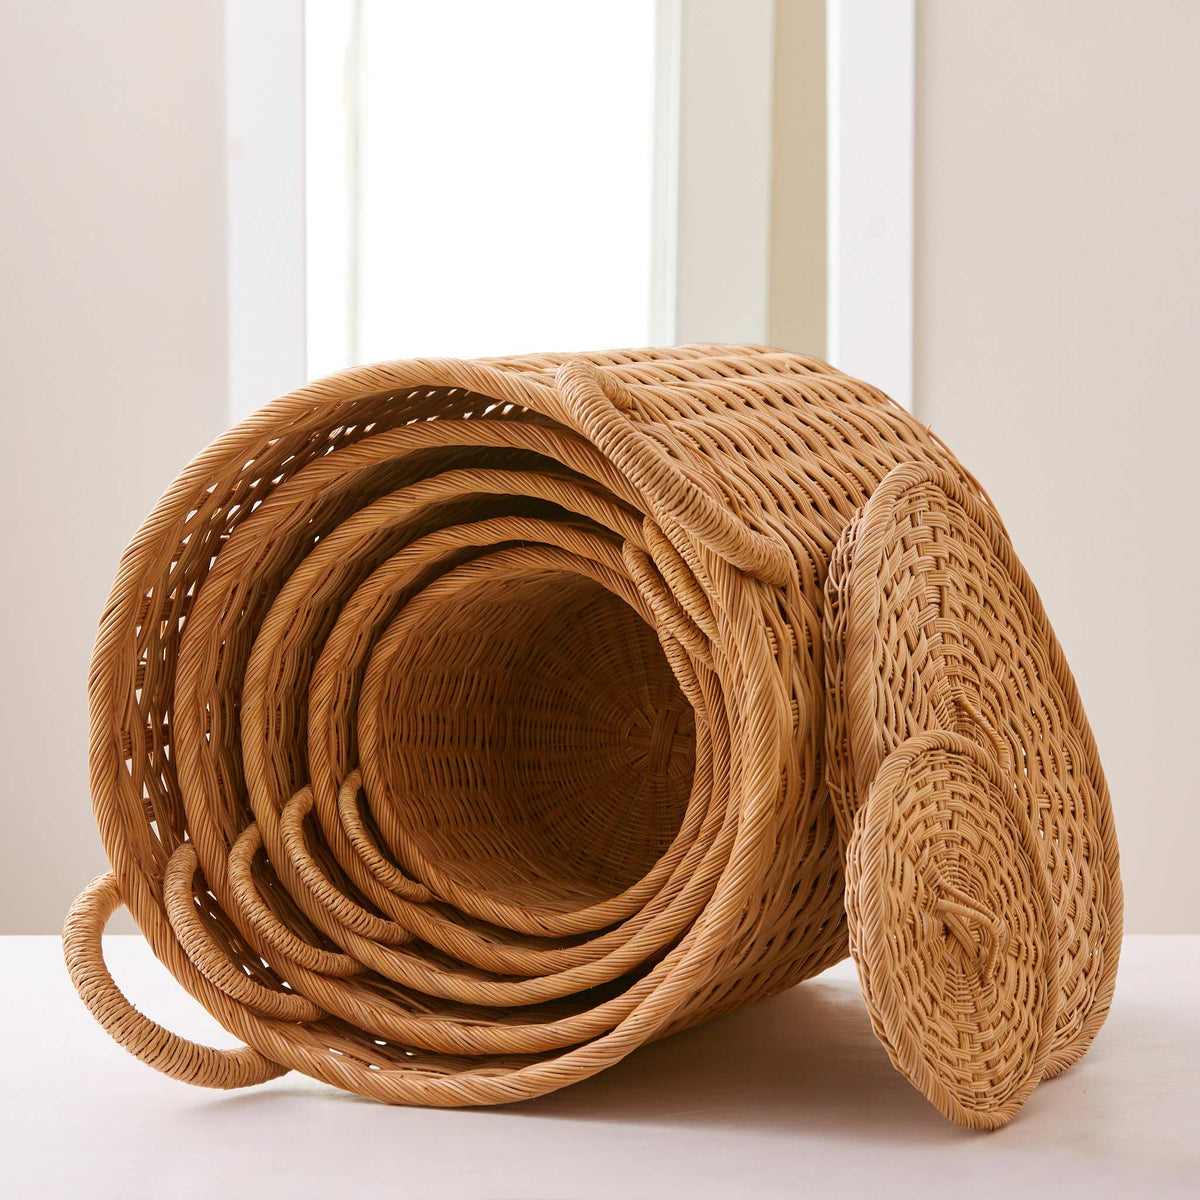 Round rattan storage baskets. Unique storage baskets with lids and handles. 5 sizes from large storage baskets to small. Perfect baskets for shelves.